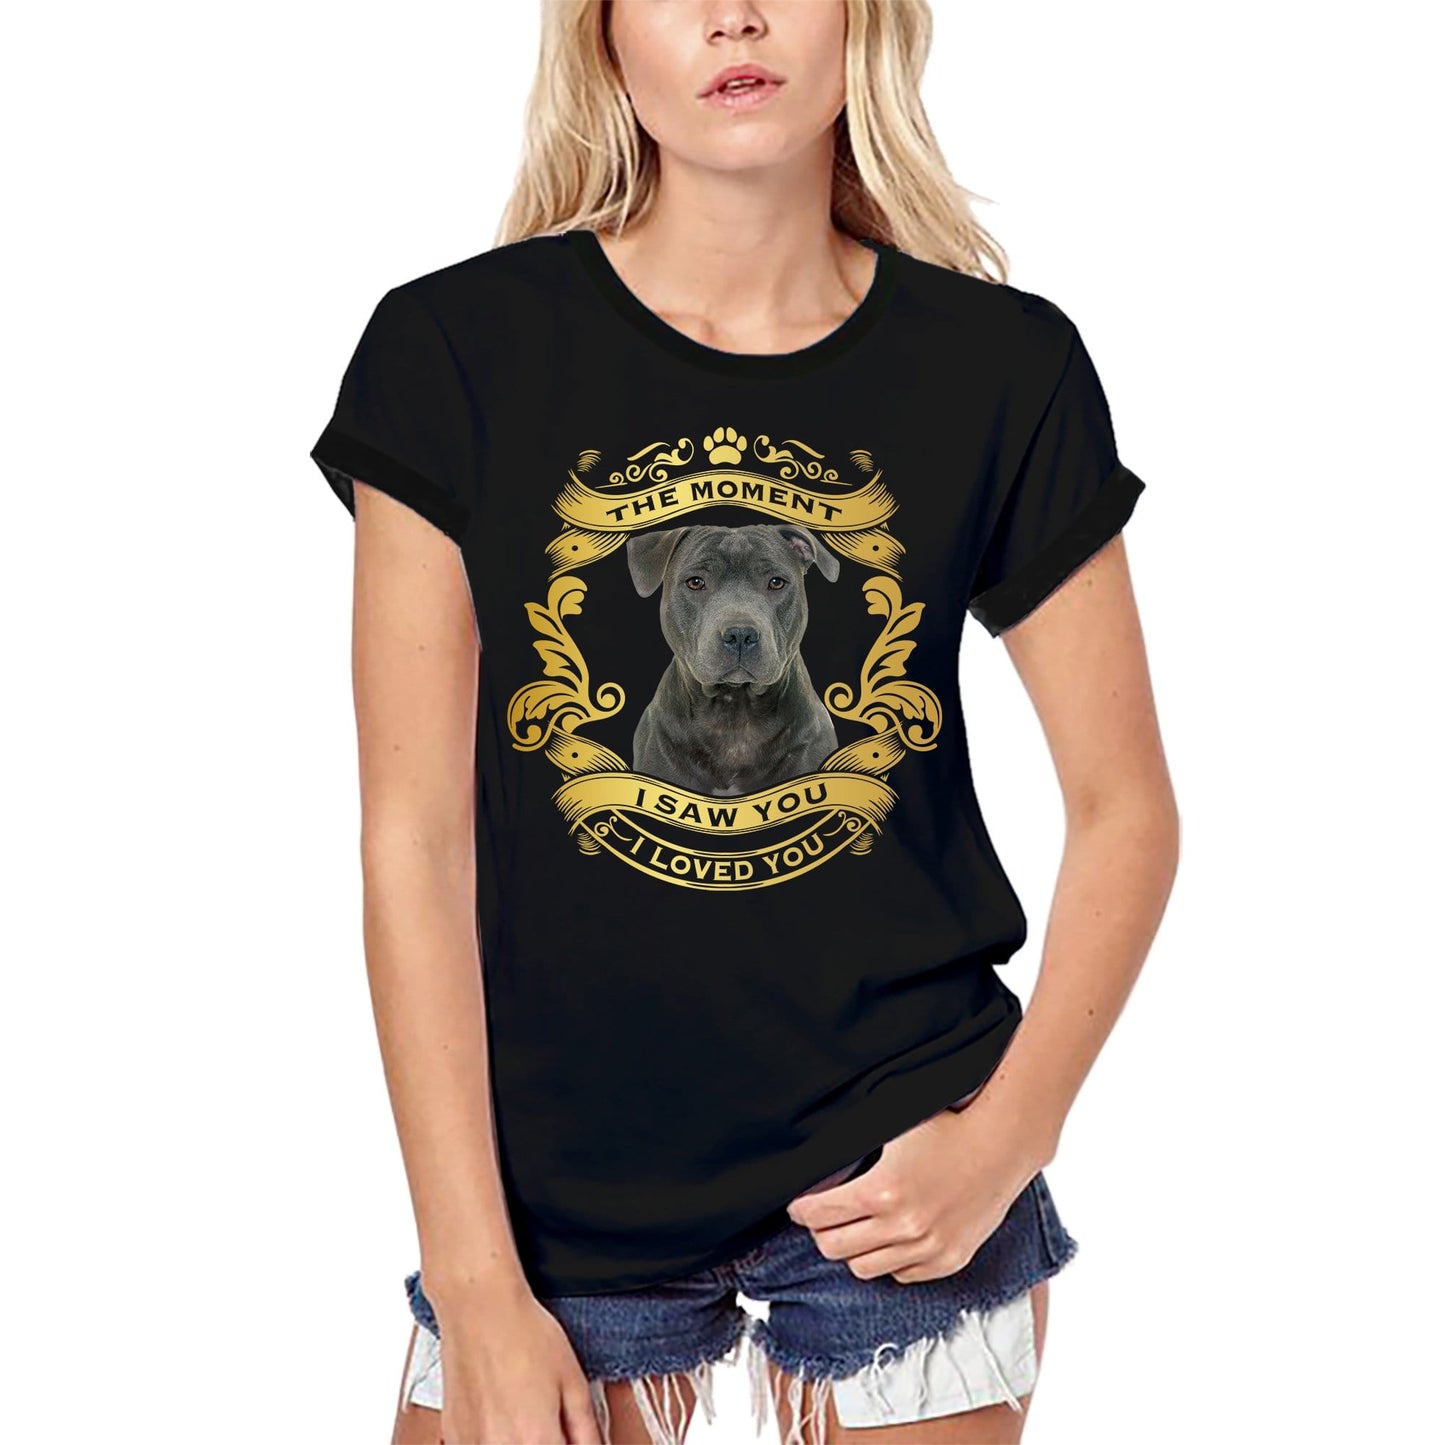 ULTRABASIC Women's Organic T-Shirt Staffordshire Bull Terrier Dog - Moment I Saw You I Loved You Puppy Tee Shirt for Ladies